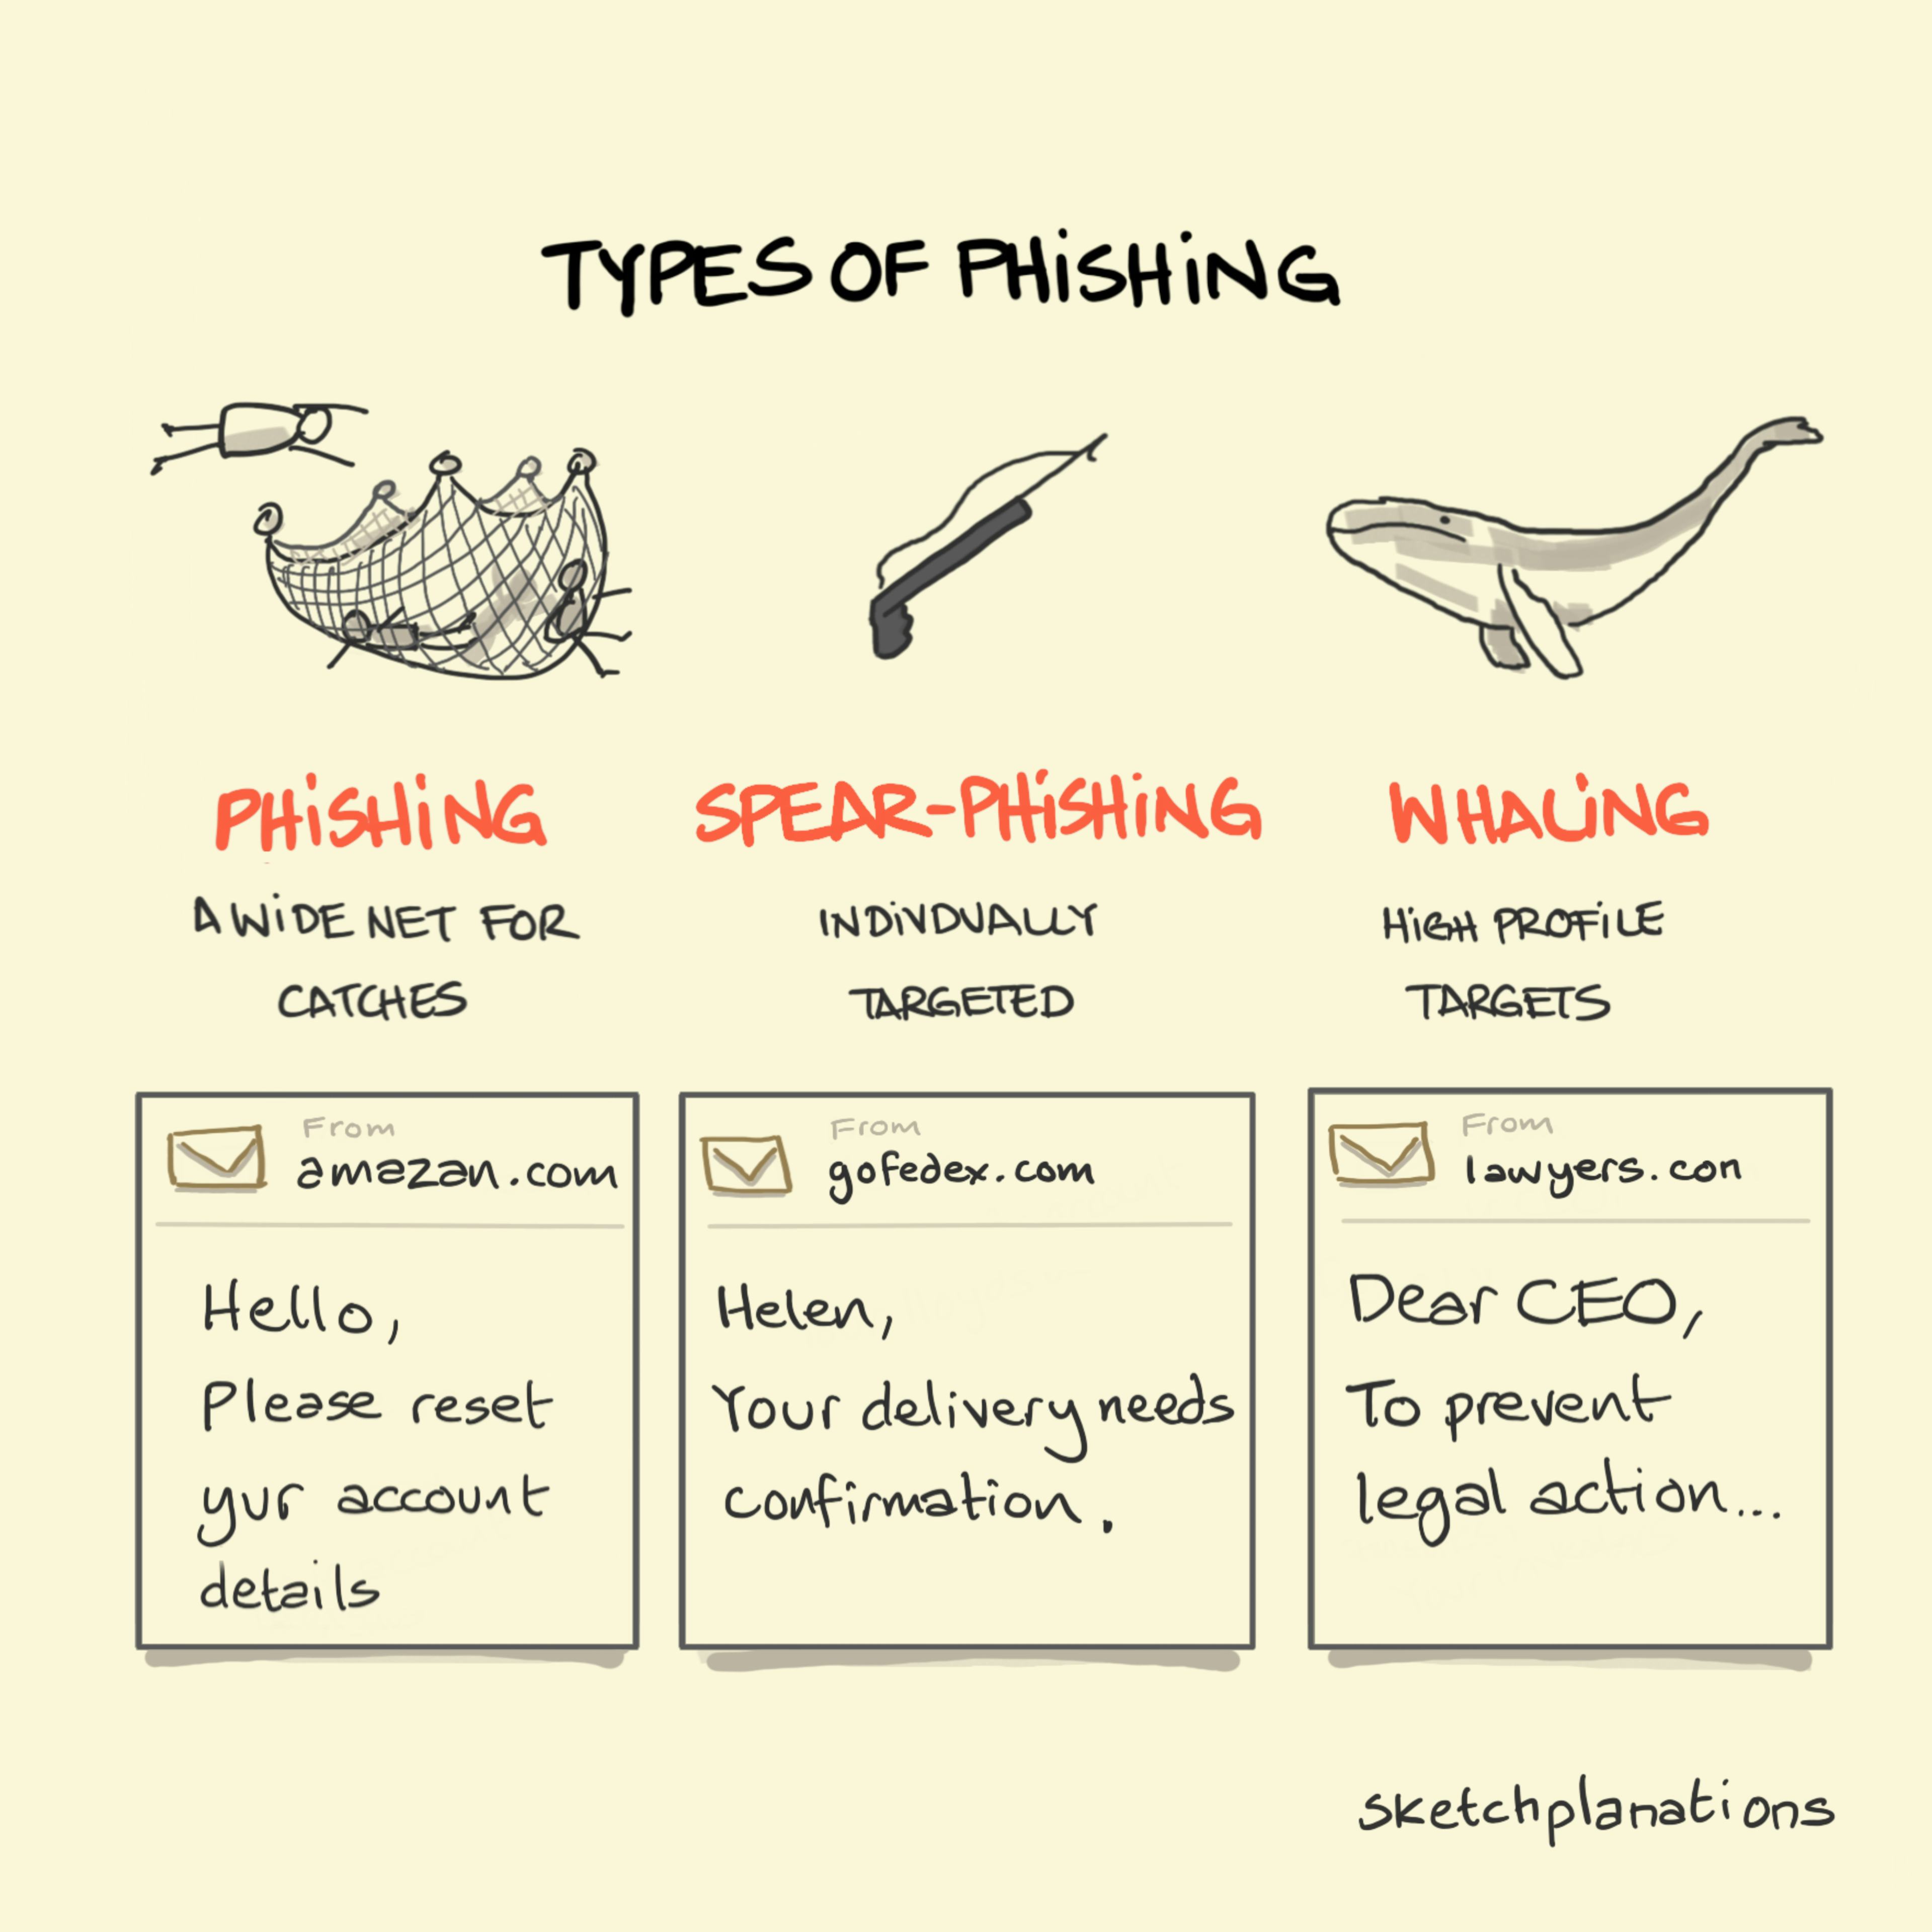 Types of phishing: phishing, spear-phishing, whaling explained — 3 common types of phishing communications are shown from the impersonal, wide phishing net email, thrown out to a large population; to more personalised "spear-phishing", picking you off with a harpoon gun; to whaling, where scammers go after high profile targets like CEOs. 